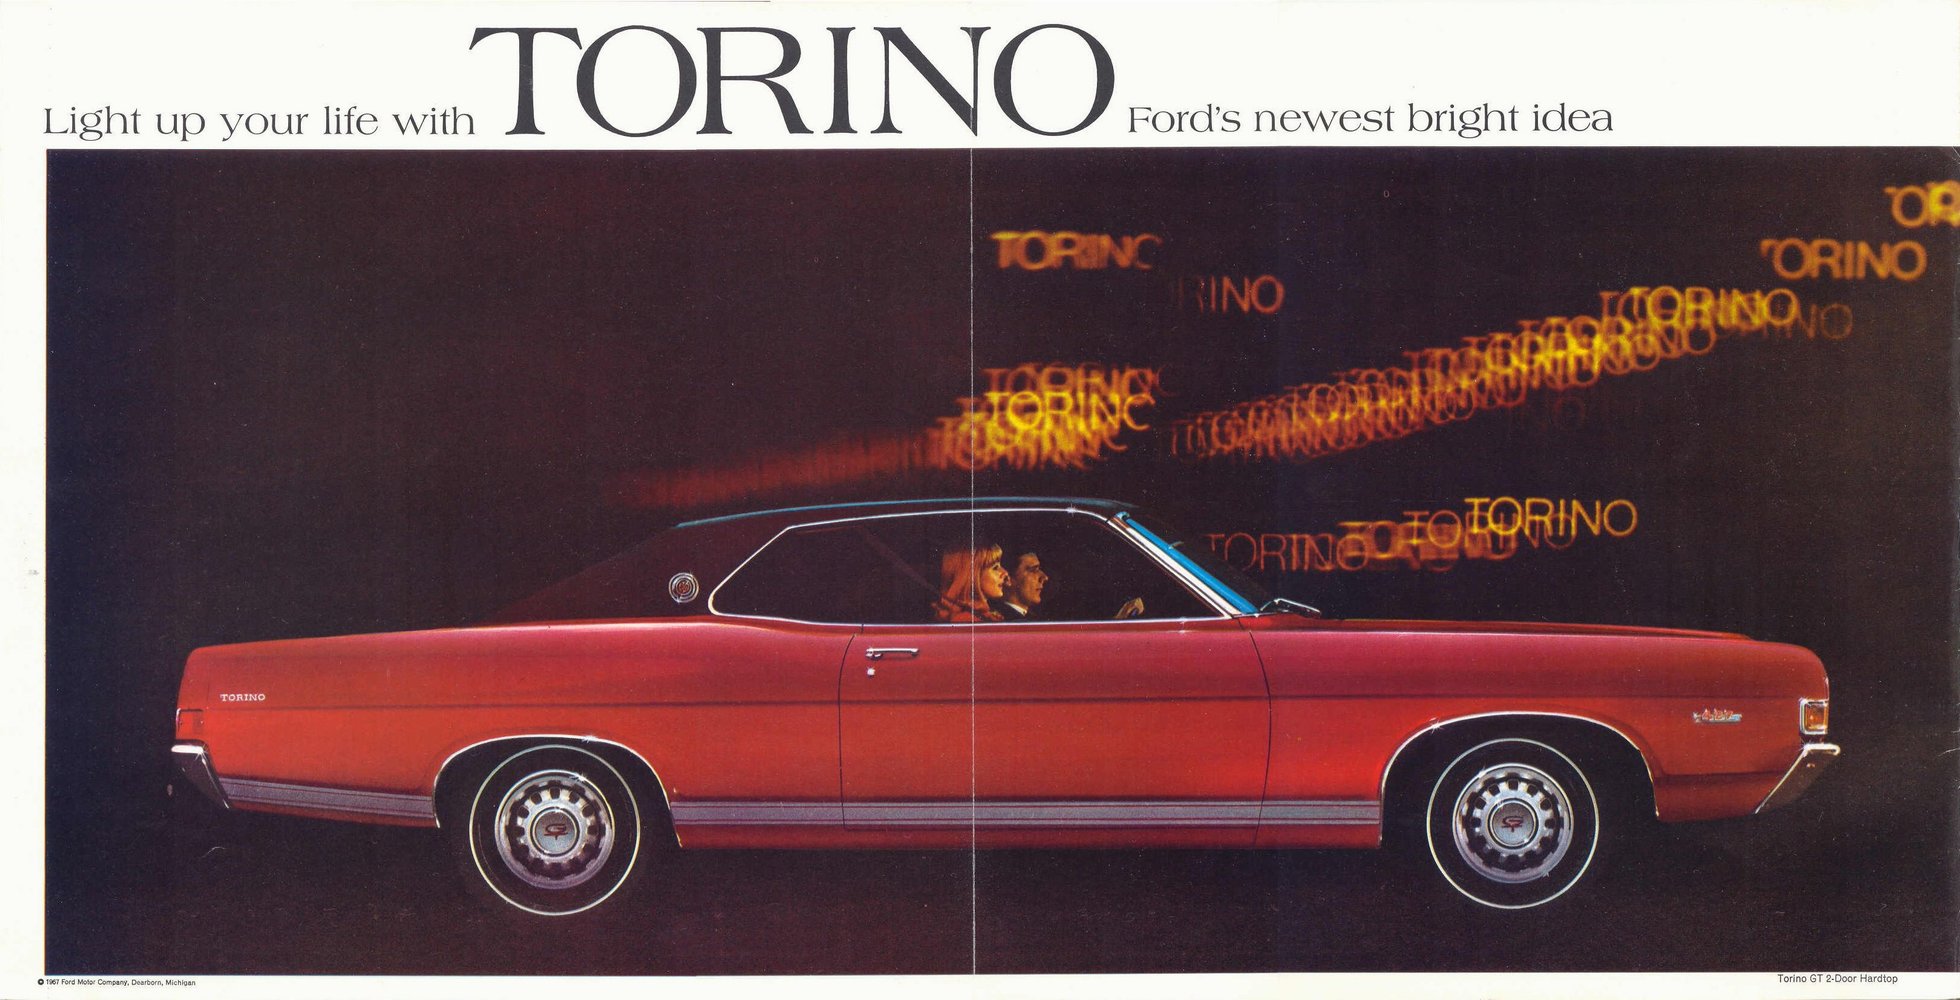 1968 Ford Torino Brochure Page 8